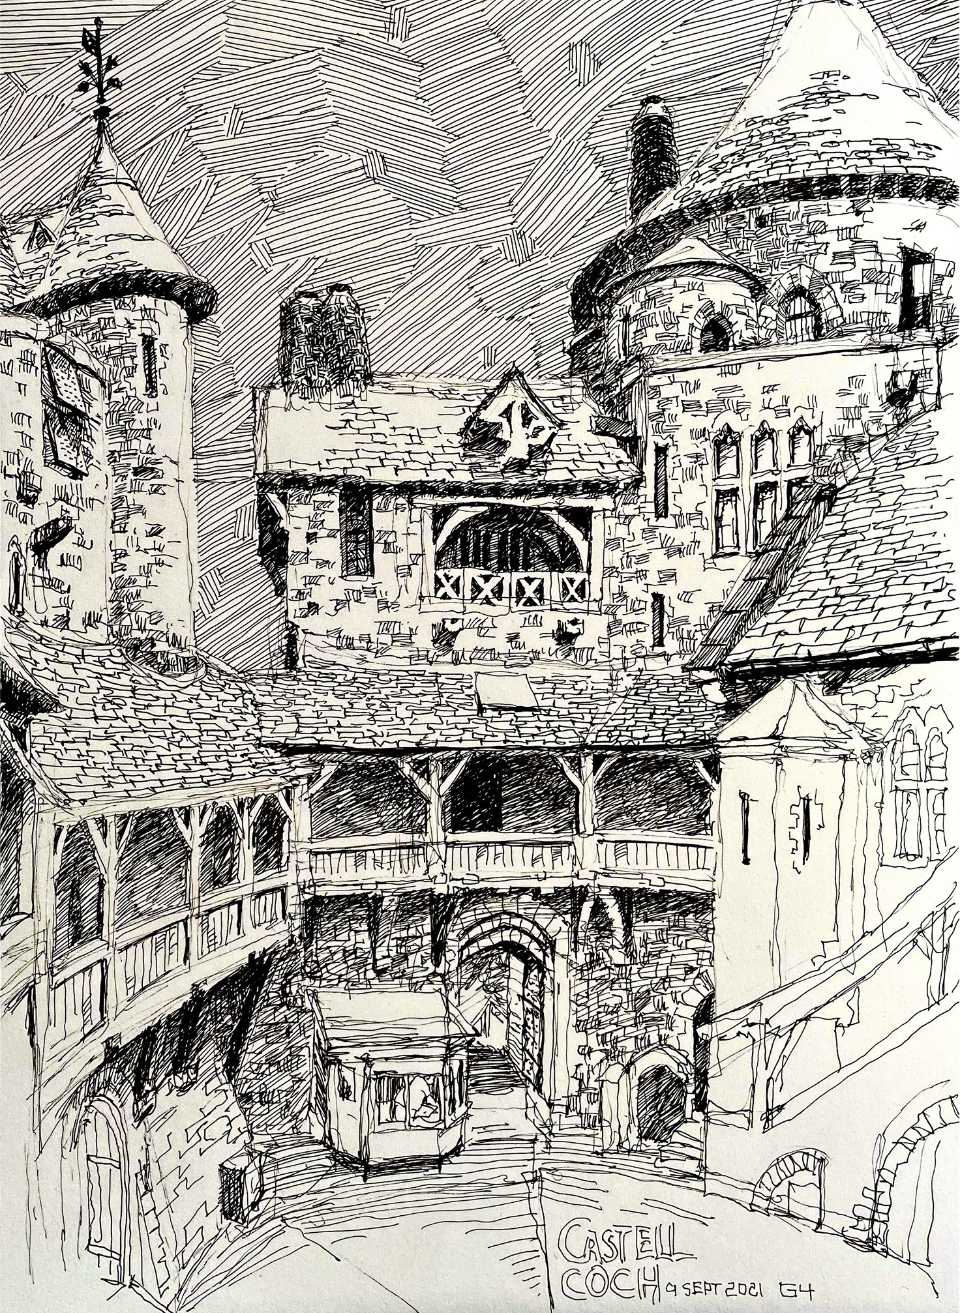 Illustration of Castell Coch by Gary Yeung